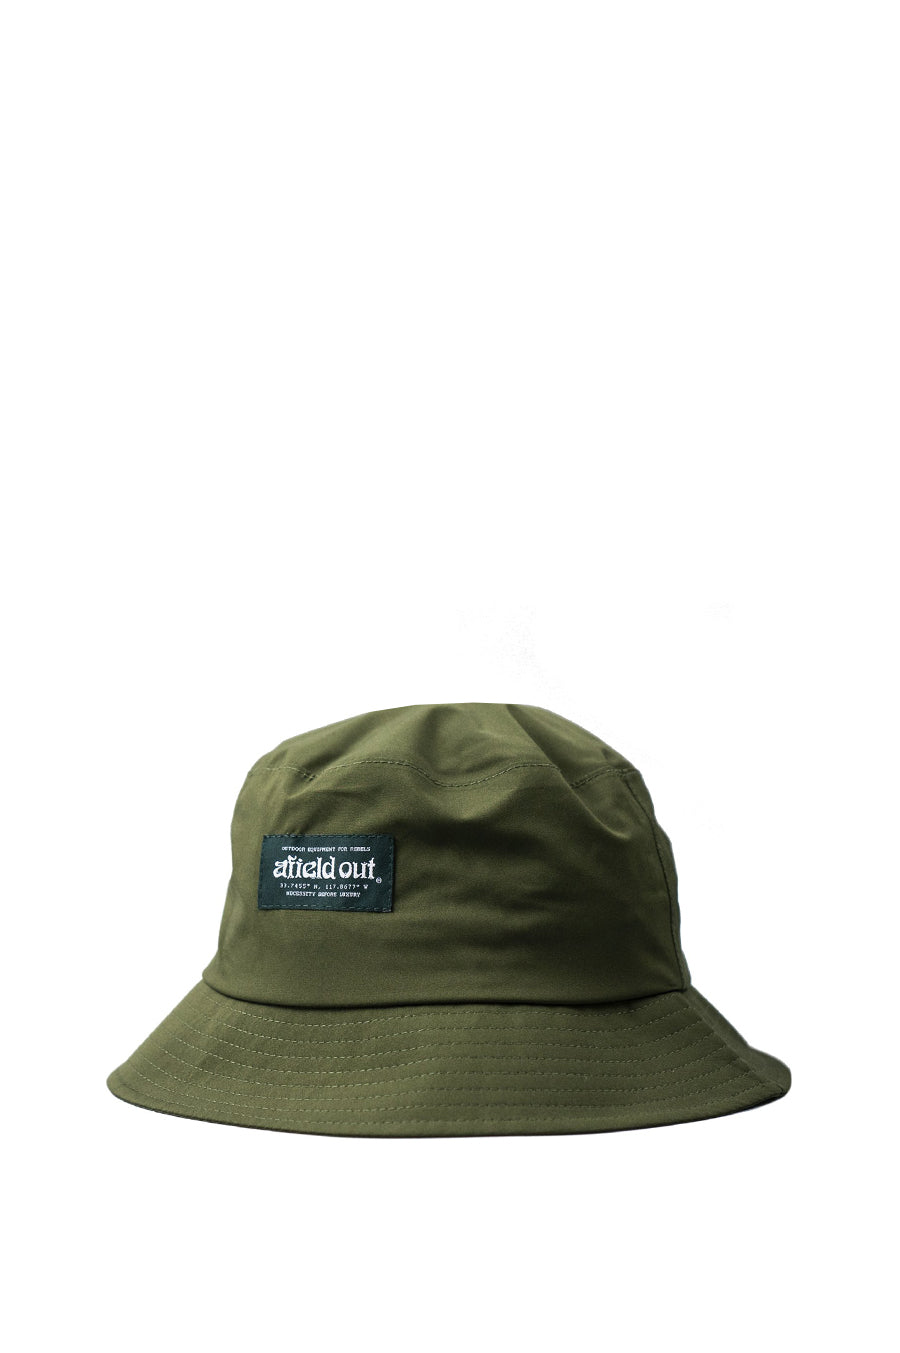 AFIELD OUT DARBY BUCKET HAT SAGE – BLENDS